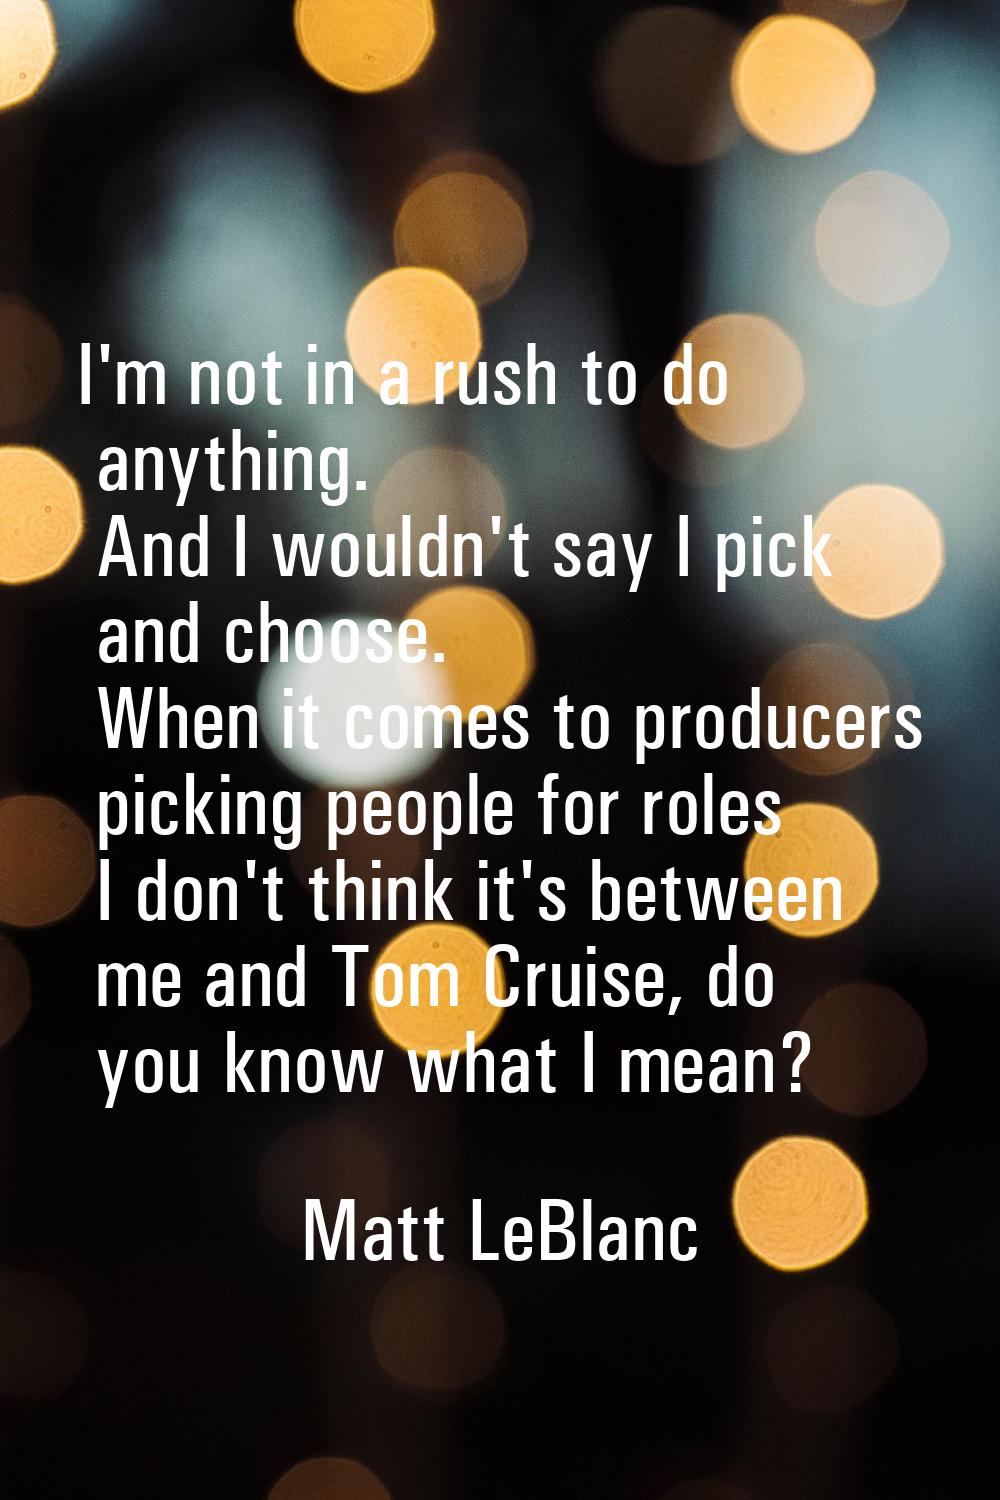 I'm not in a rush to do anything. And I wouldn't say I pick and choose. When it comes to producers 